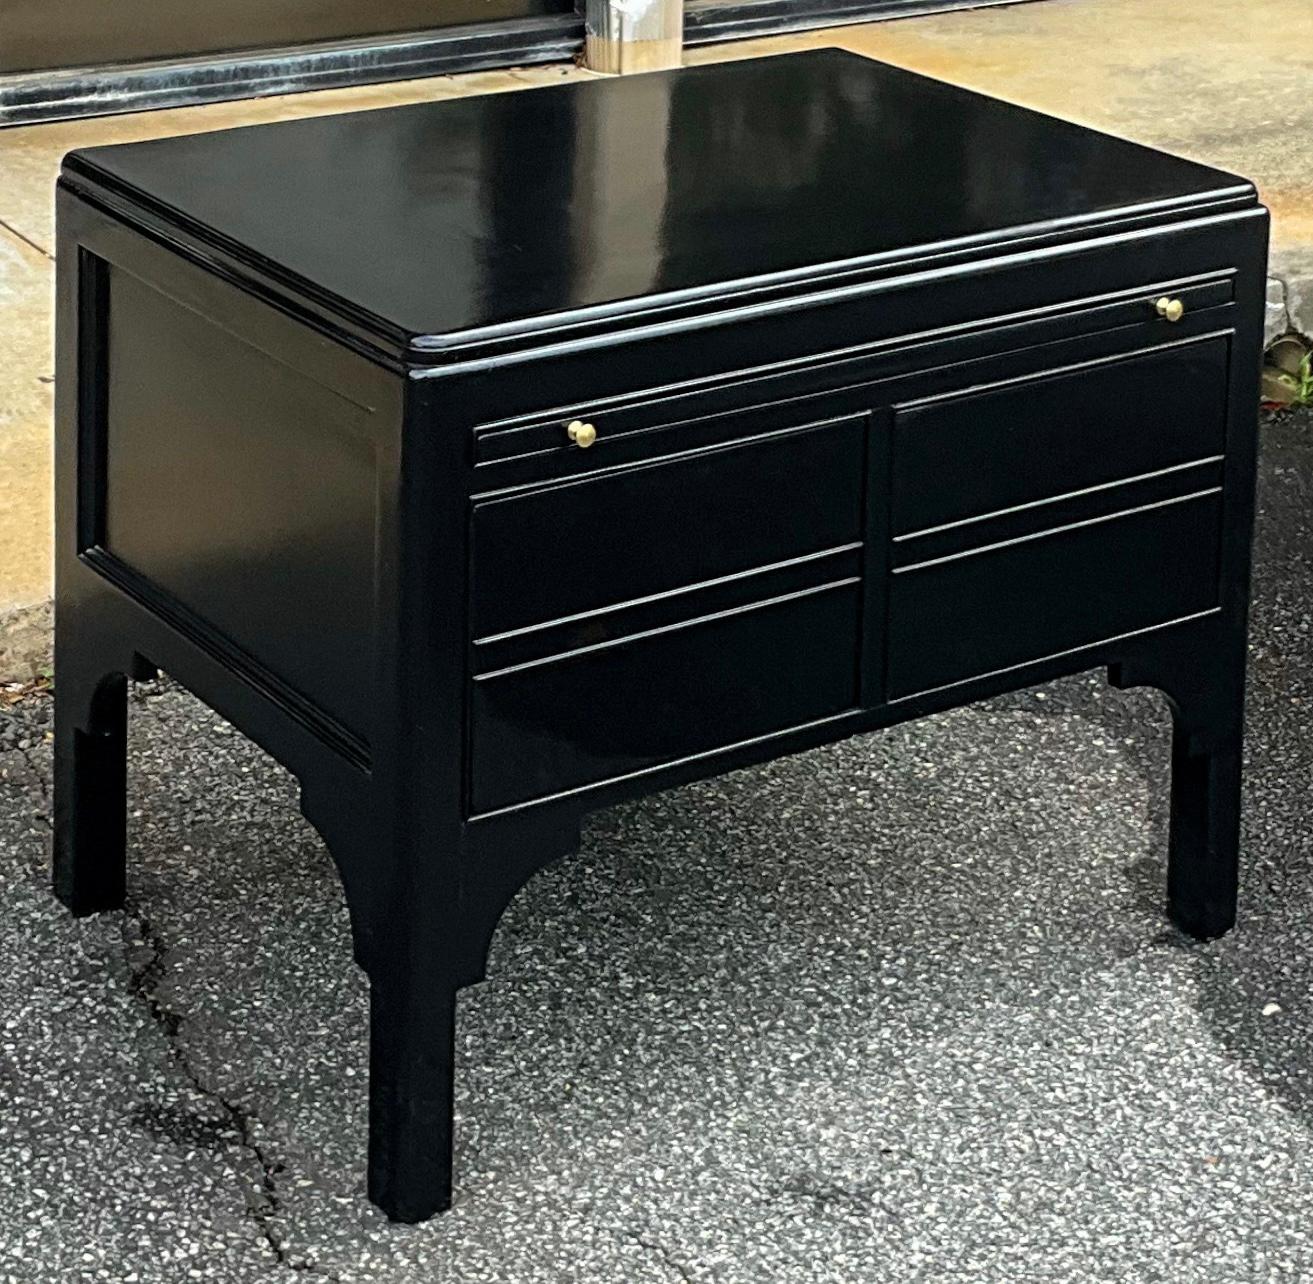 Brass Mid-Century Asian Modern Low Profile Black Lacquer Side Tables / Chests -Pair For Sale